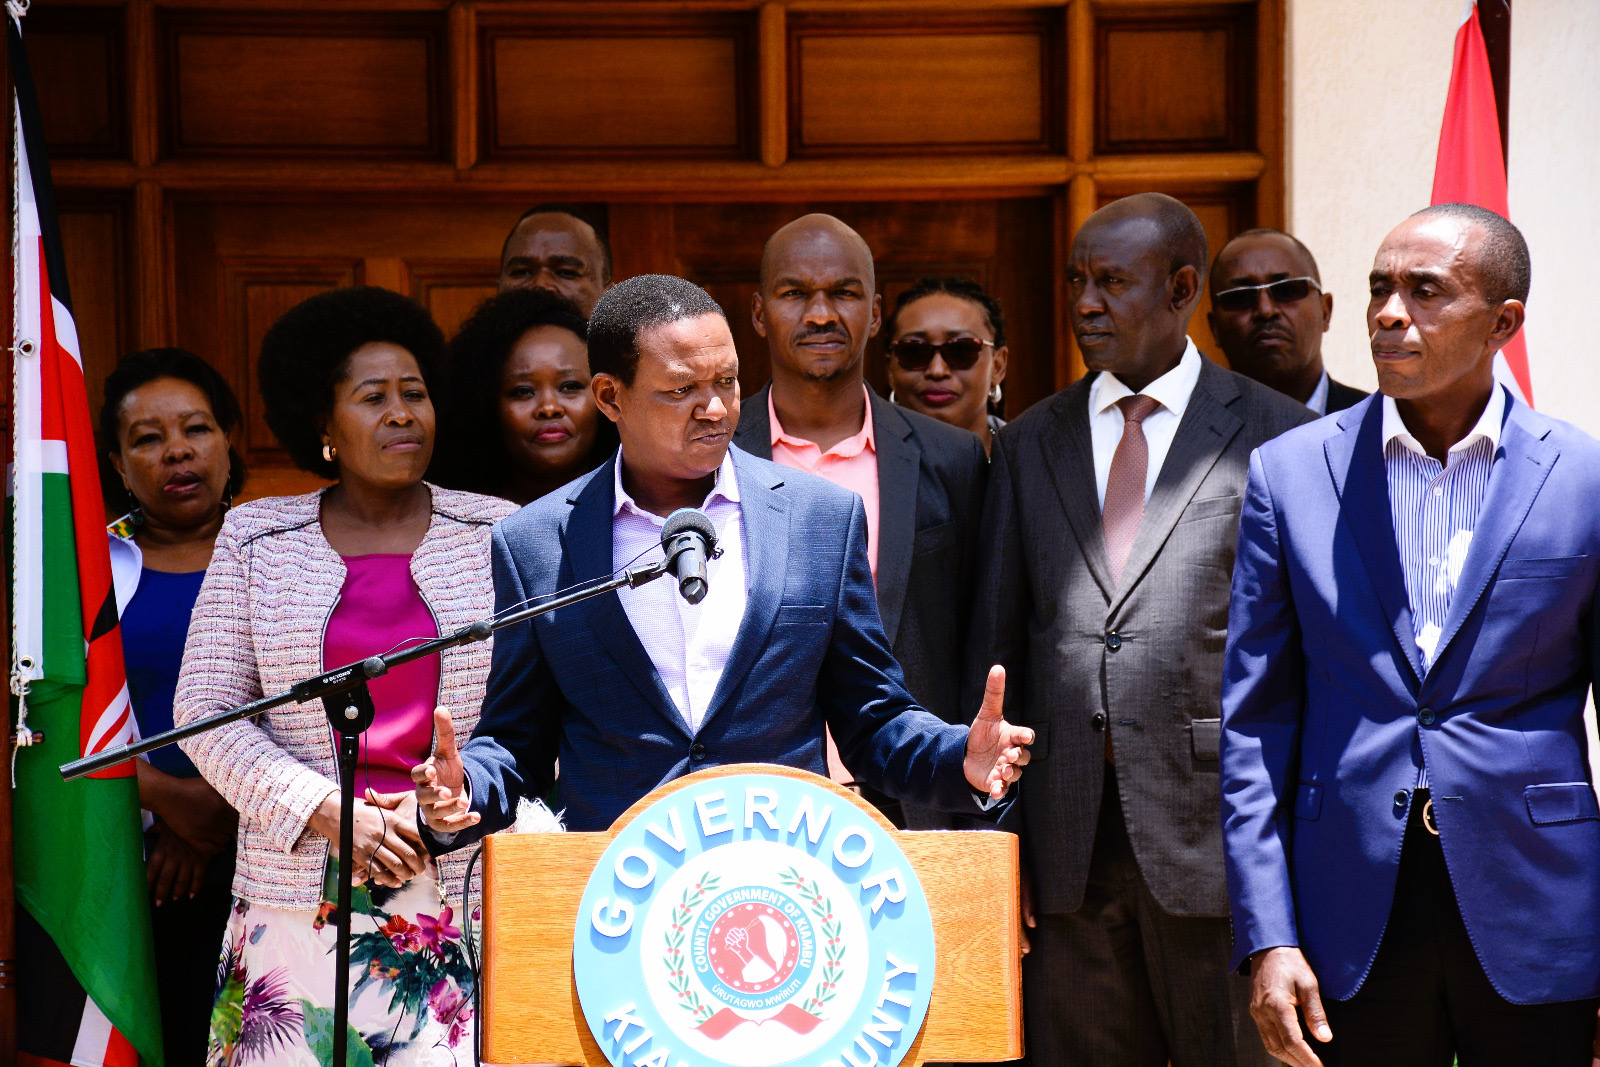 The Cabinet Secretary, Ministry of Tourism and Wildlife, Dr. Alfred Mutua, addressing the media.